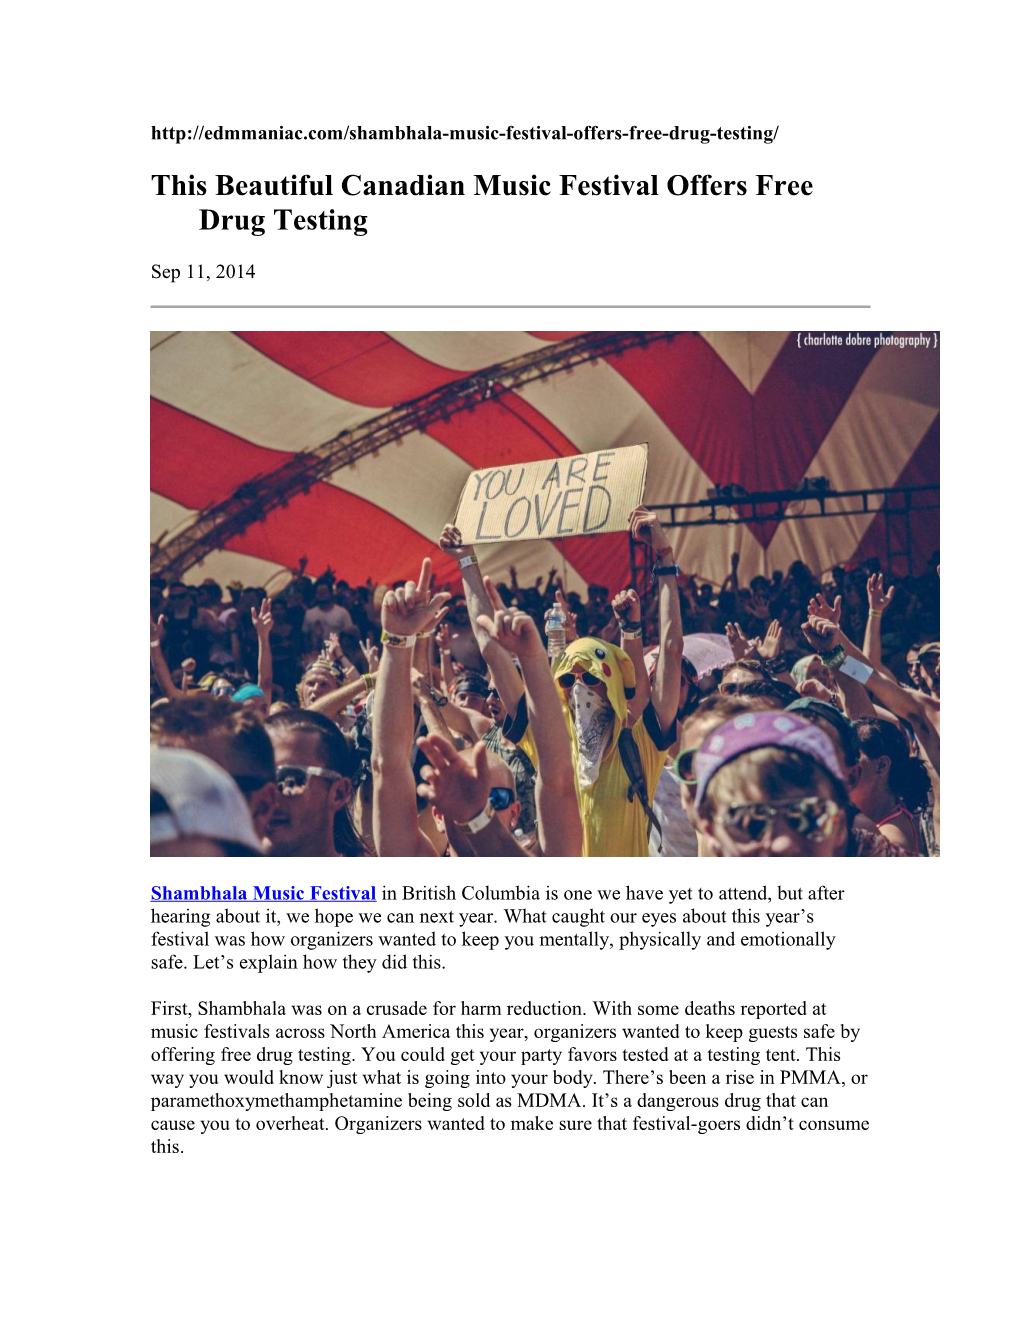 This Beautiful Canadian Music Festival Offers Free Drug Testing